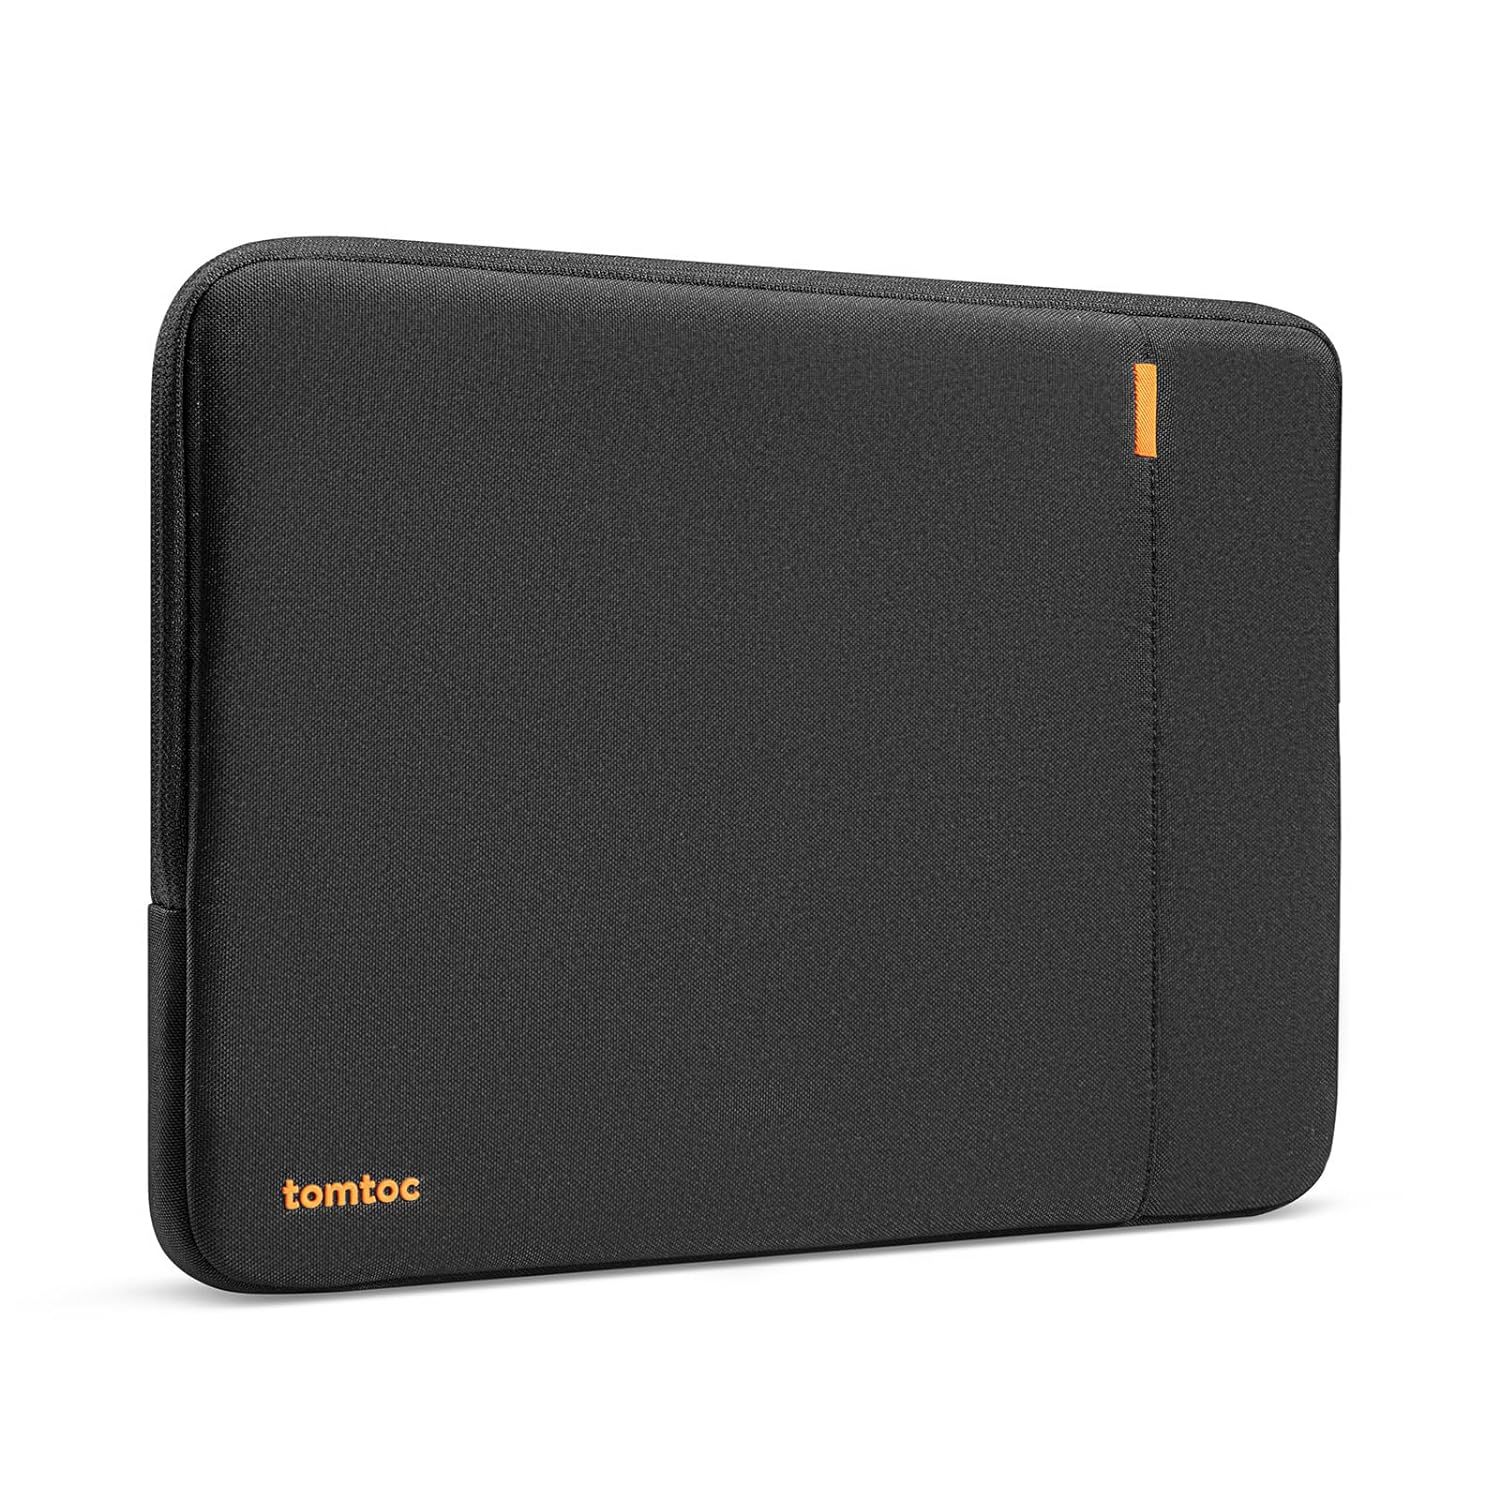 tomtoc 360 Protective Laptop Sleeve for 13.5 Inch Microsoft New Surface Laptop S - $51.29